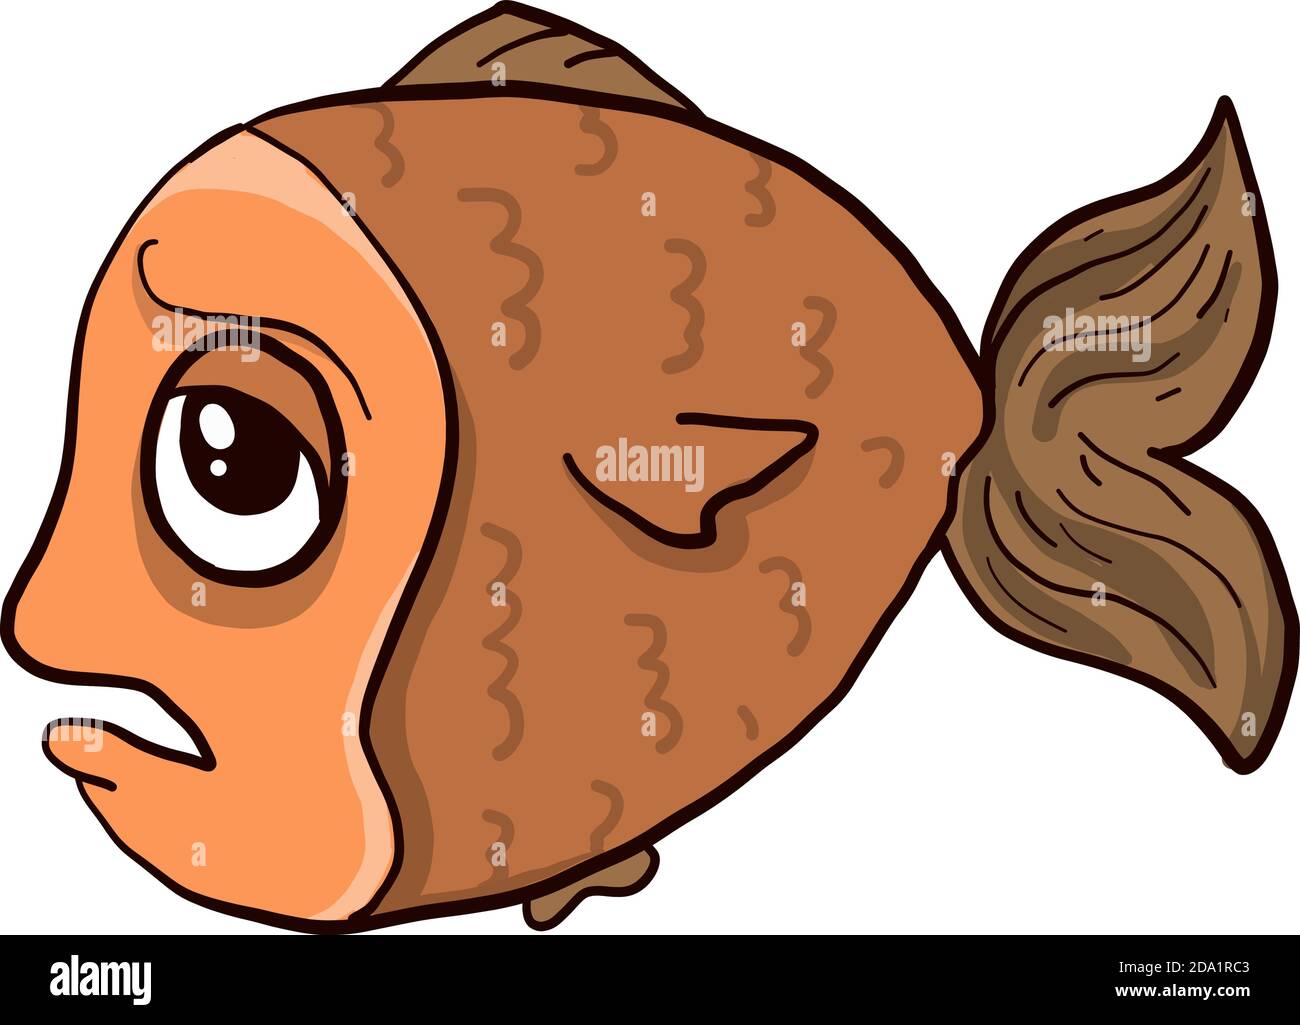 Sad fish illustration Cut Out Stock Images & Pictures - Alamy